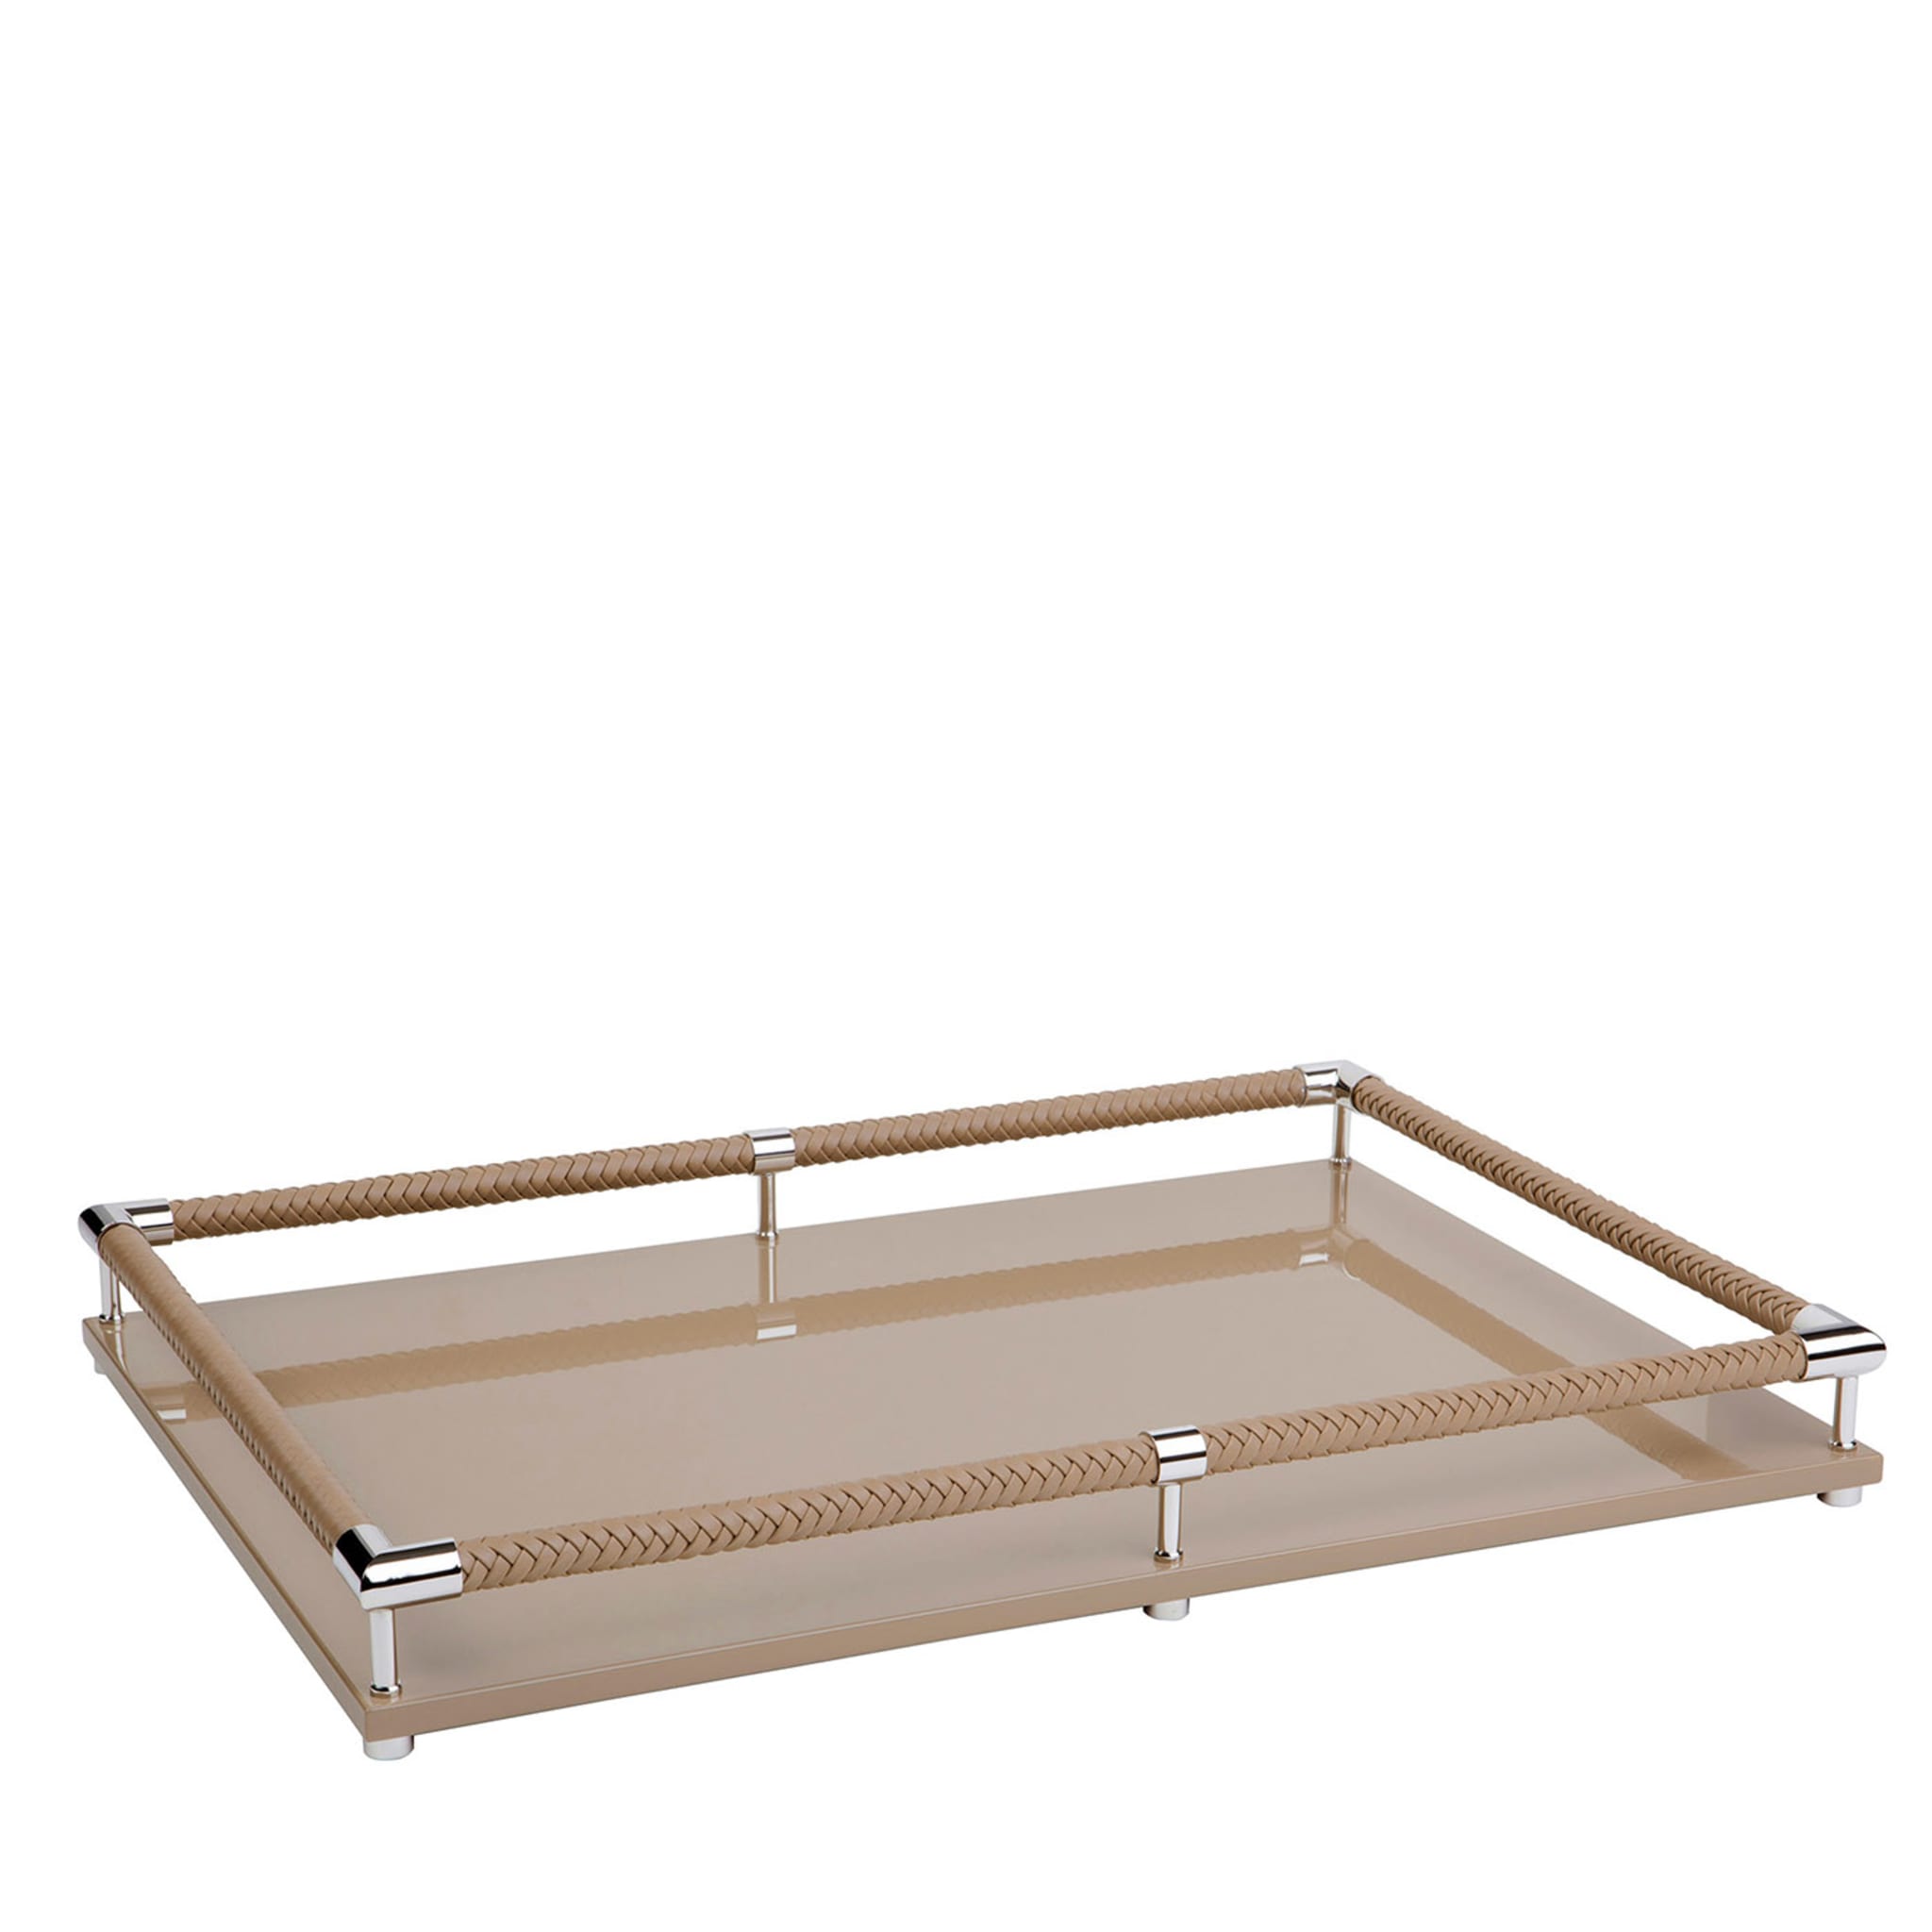 Thea Lacquer Rectangular Tray - Main view